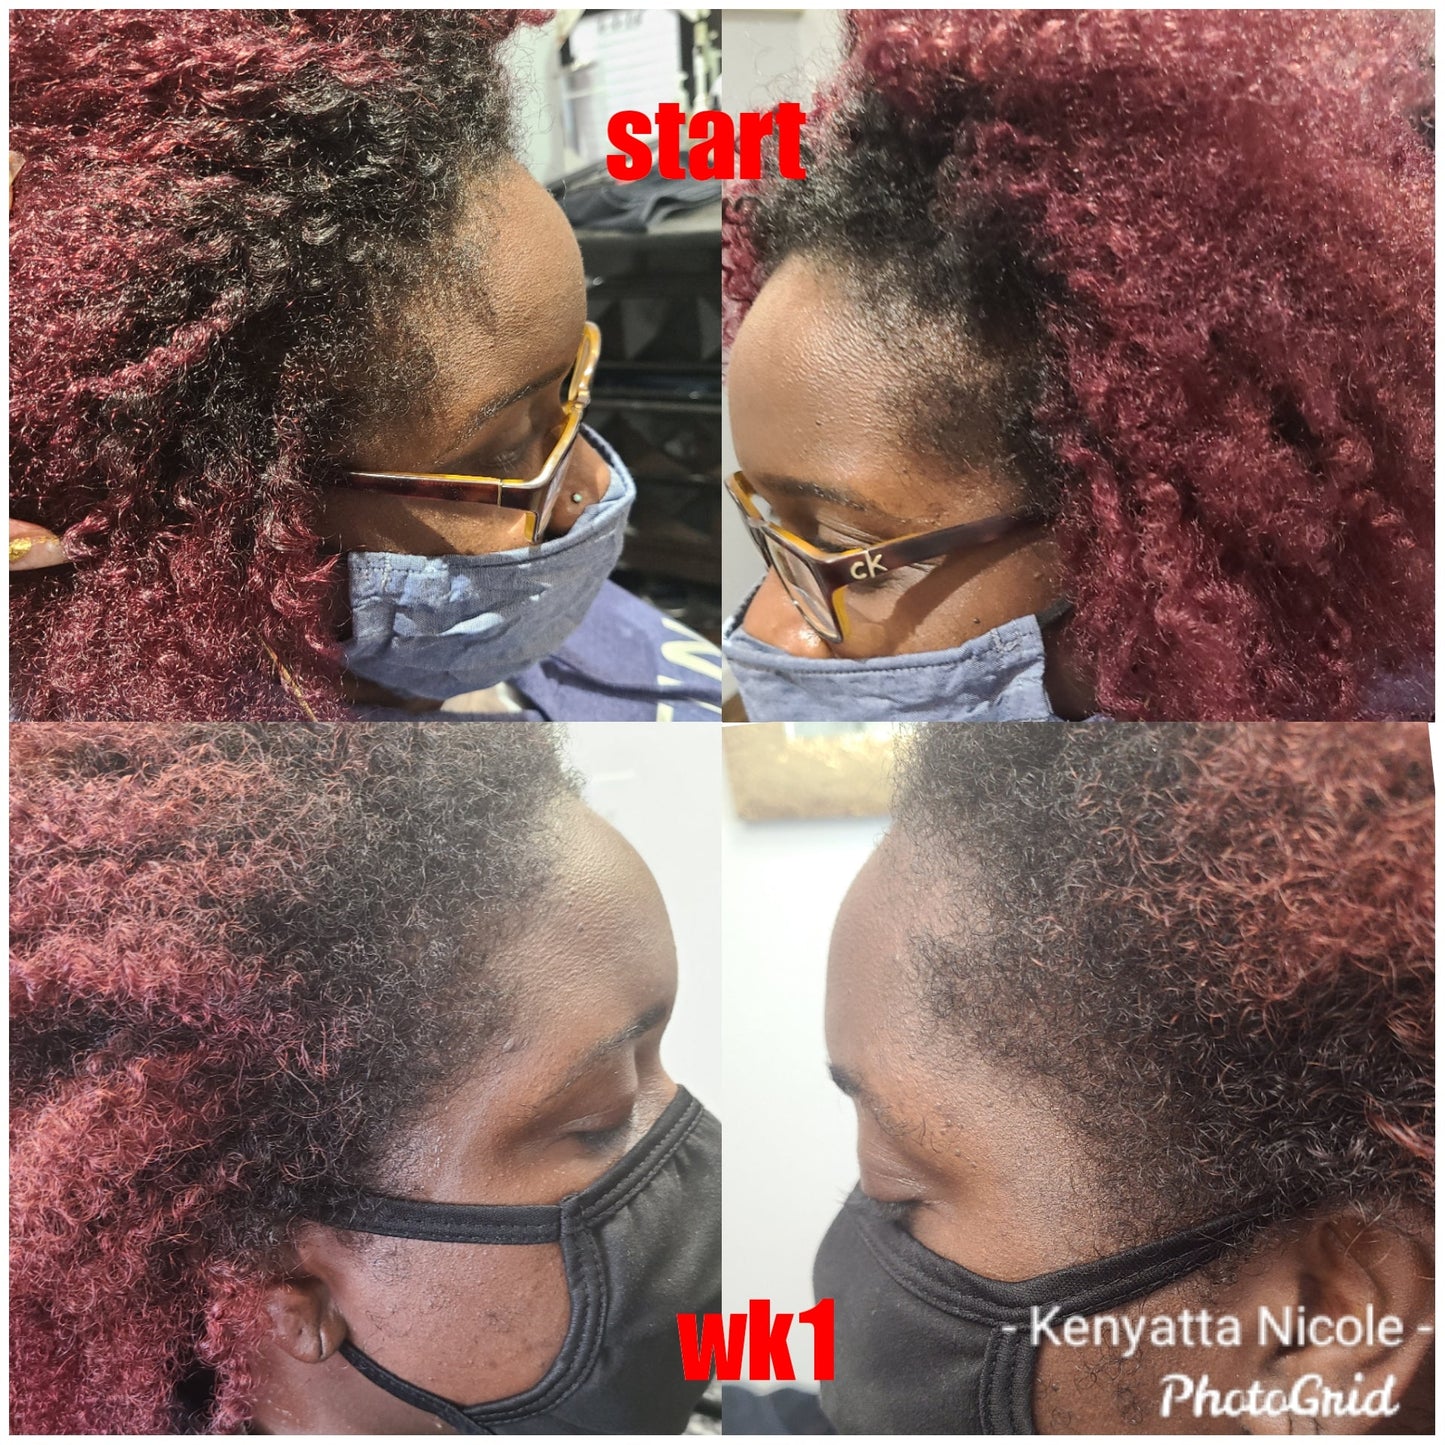 Nora Regrowth serum infused with over 25 essential oils. Helps with hair growth,  edges and dry scalp. See Results in 7-14 days. Order yours today at www.theknstore.com to grow your hair and edges.. 